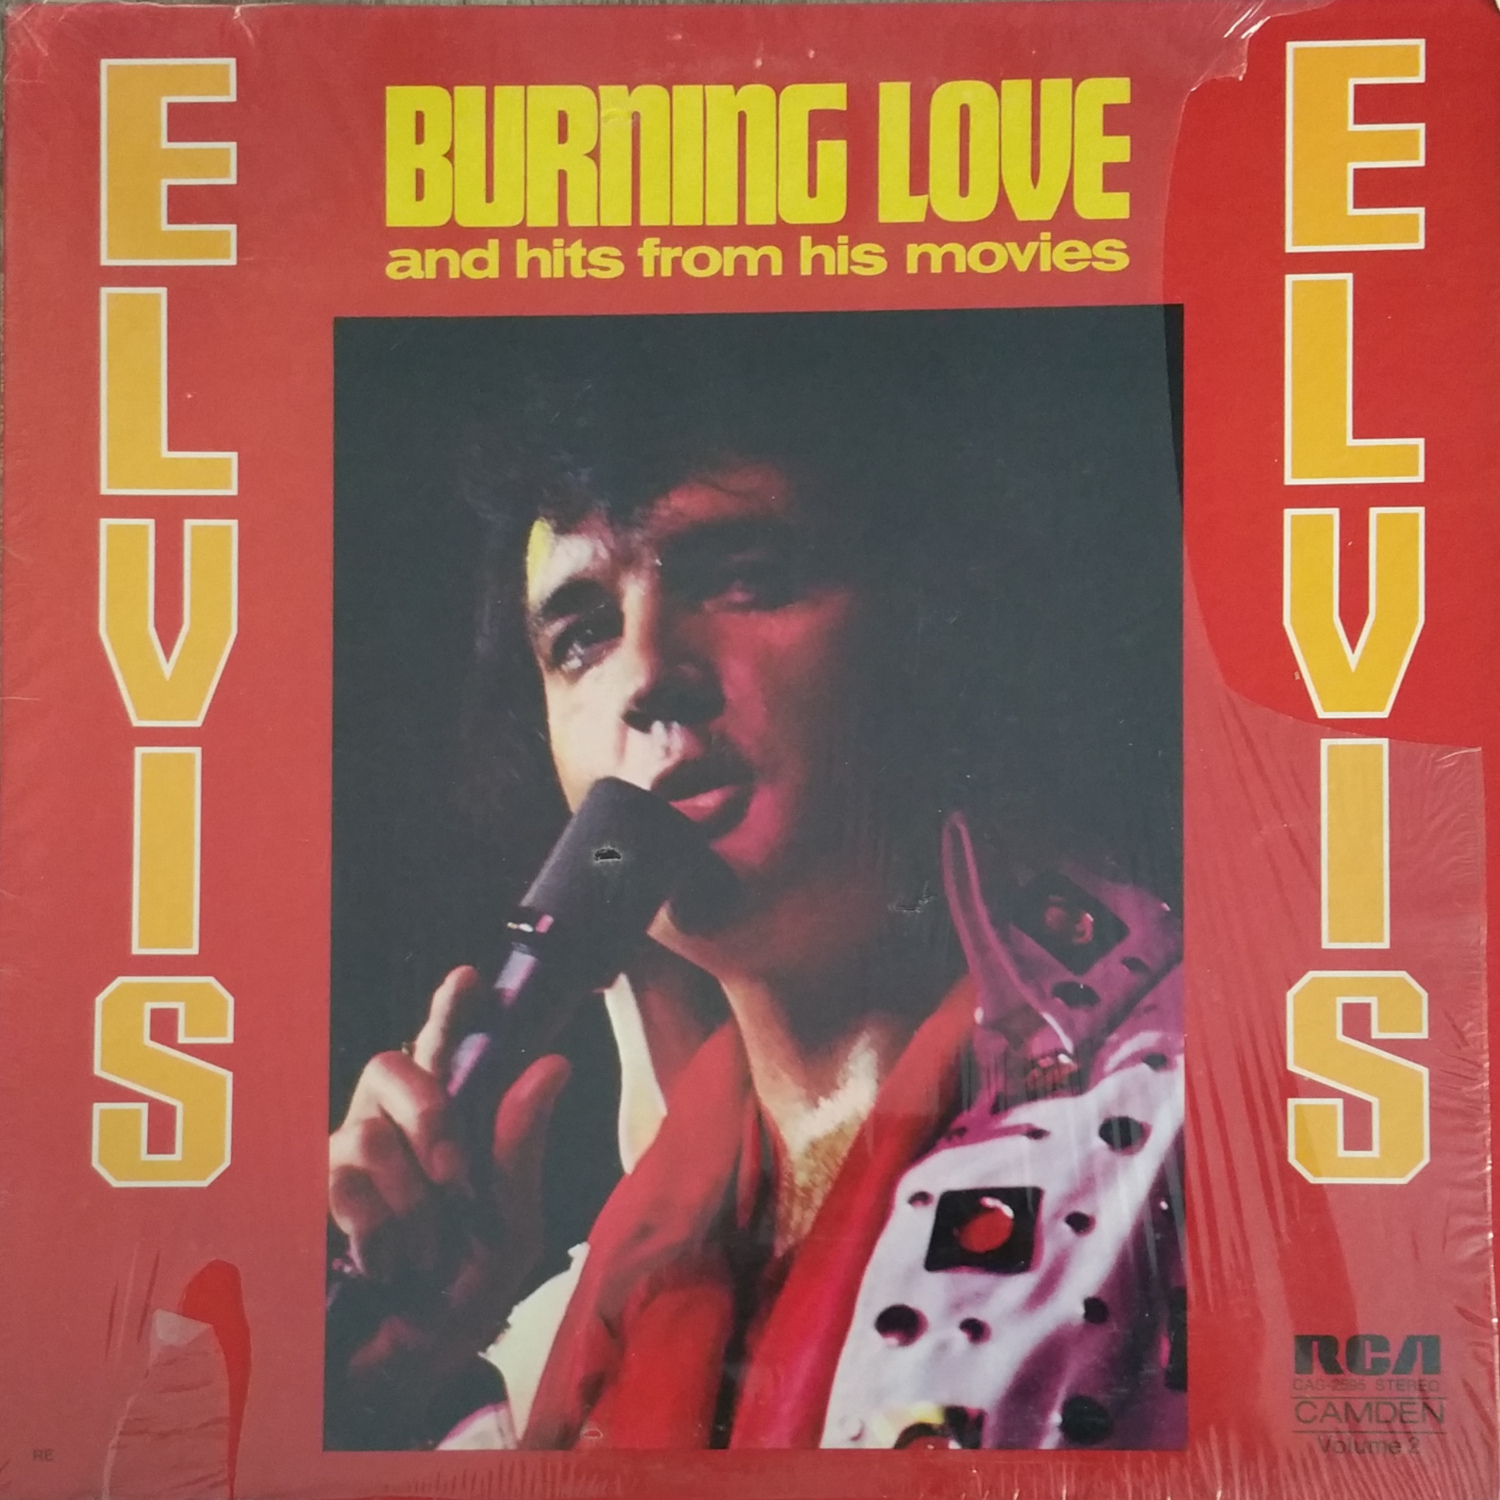 BURNING LOVE AND HITS FROM HIS MOVIES VOLUME 2 20200526_155418u6jyx